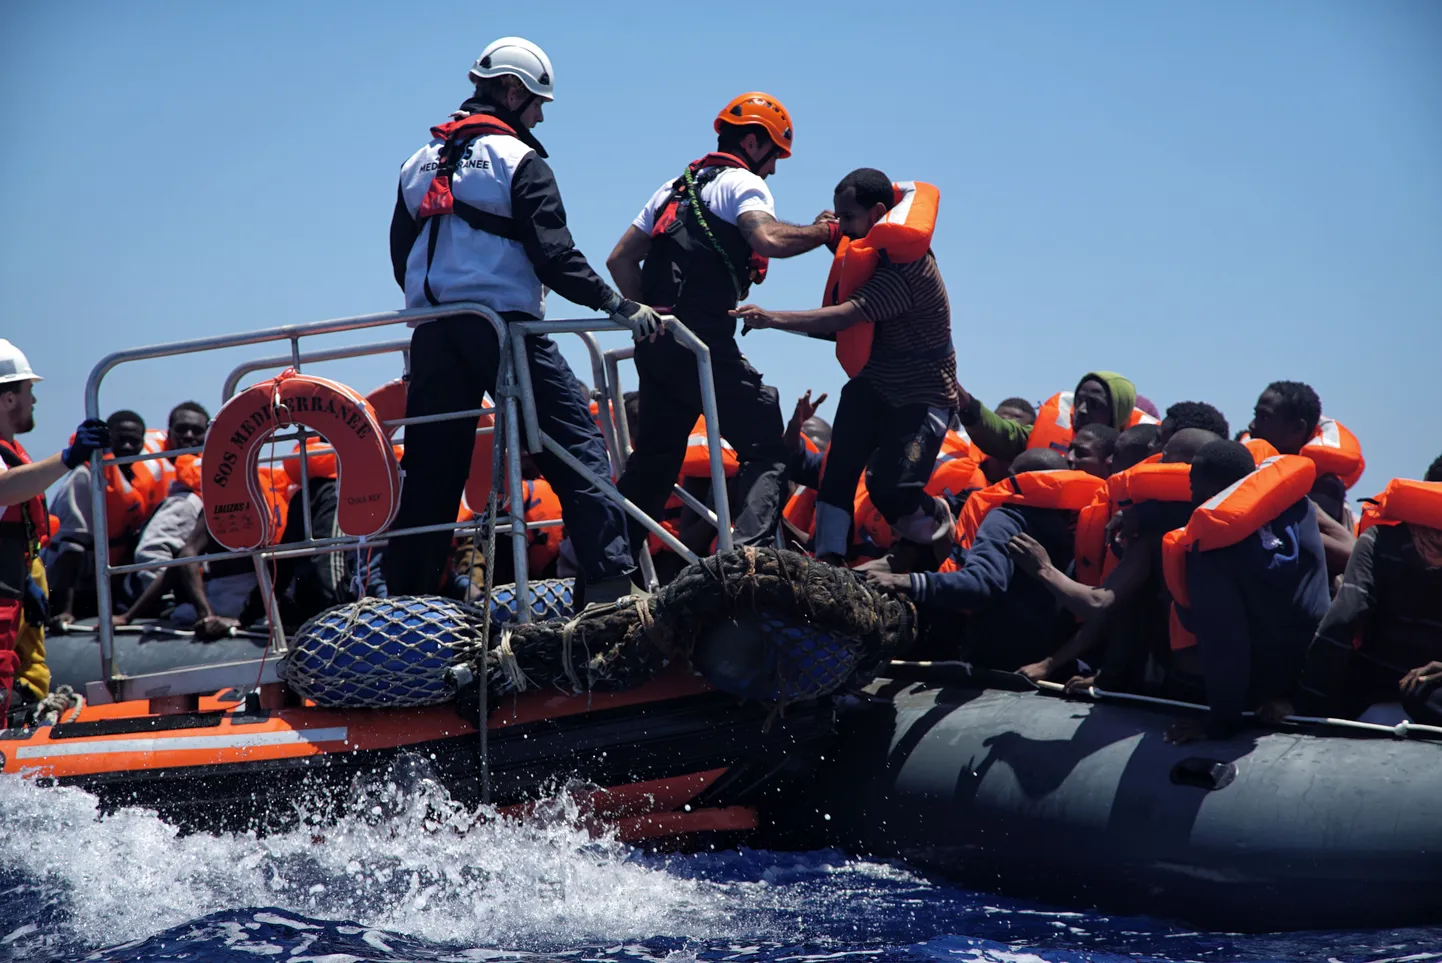 Rescue workers help migrants to disembark from a dinghy in the Mediterranean Sea, rescued by members of the aid group Medecins Sans Frontieres (MSF) and the rescue group SOS Mediterranee Rescuers of SOS Mediterranee, Thursday June 23, 2016.  The humanitarian groups distribute life jackets to the migrants in distress on the Mediterranean Sea before taking them aboard the 'Aquarius' vessel. (AP Photo/Bram Janssen)